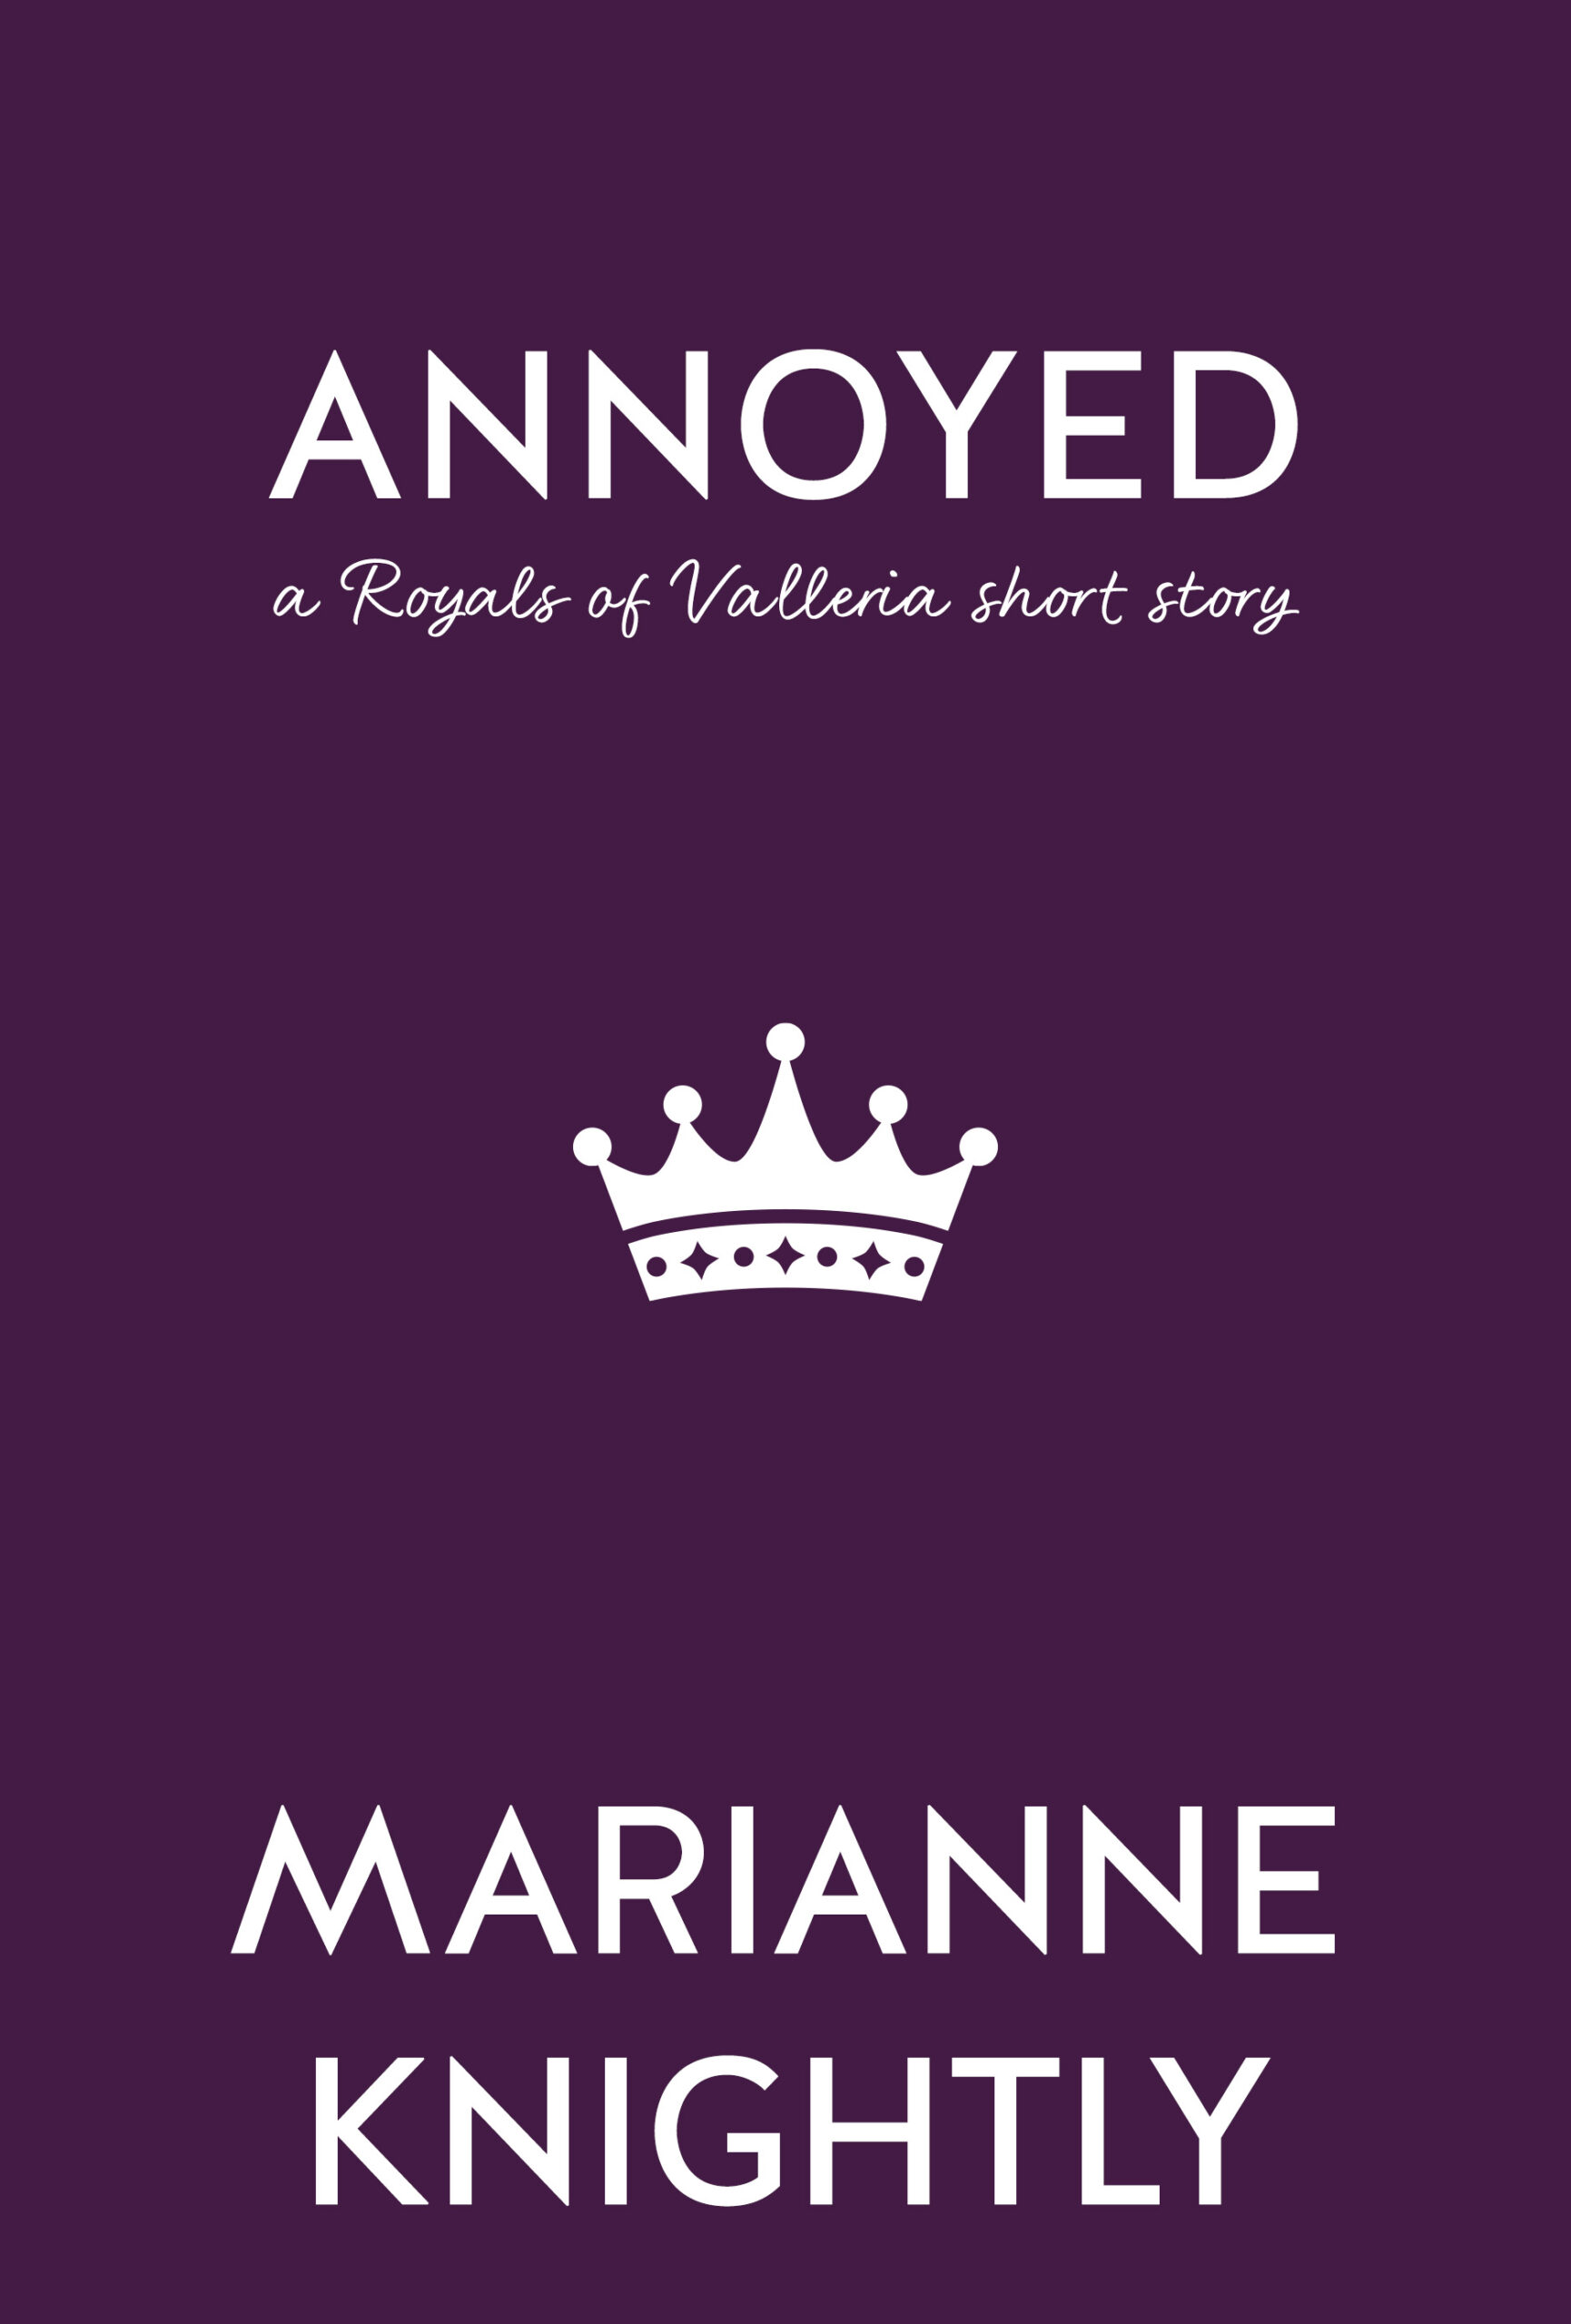 Annoyed - A Royals Short Story by Marianne Knightly